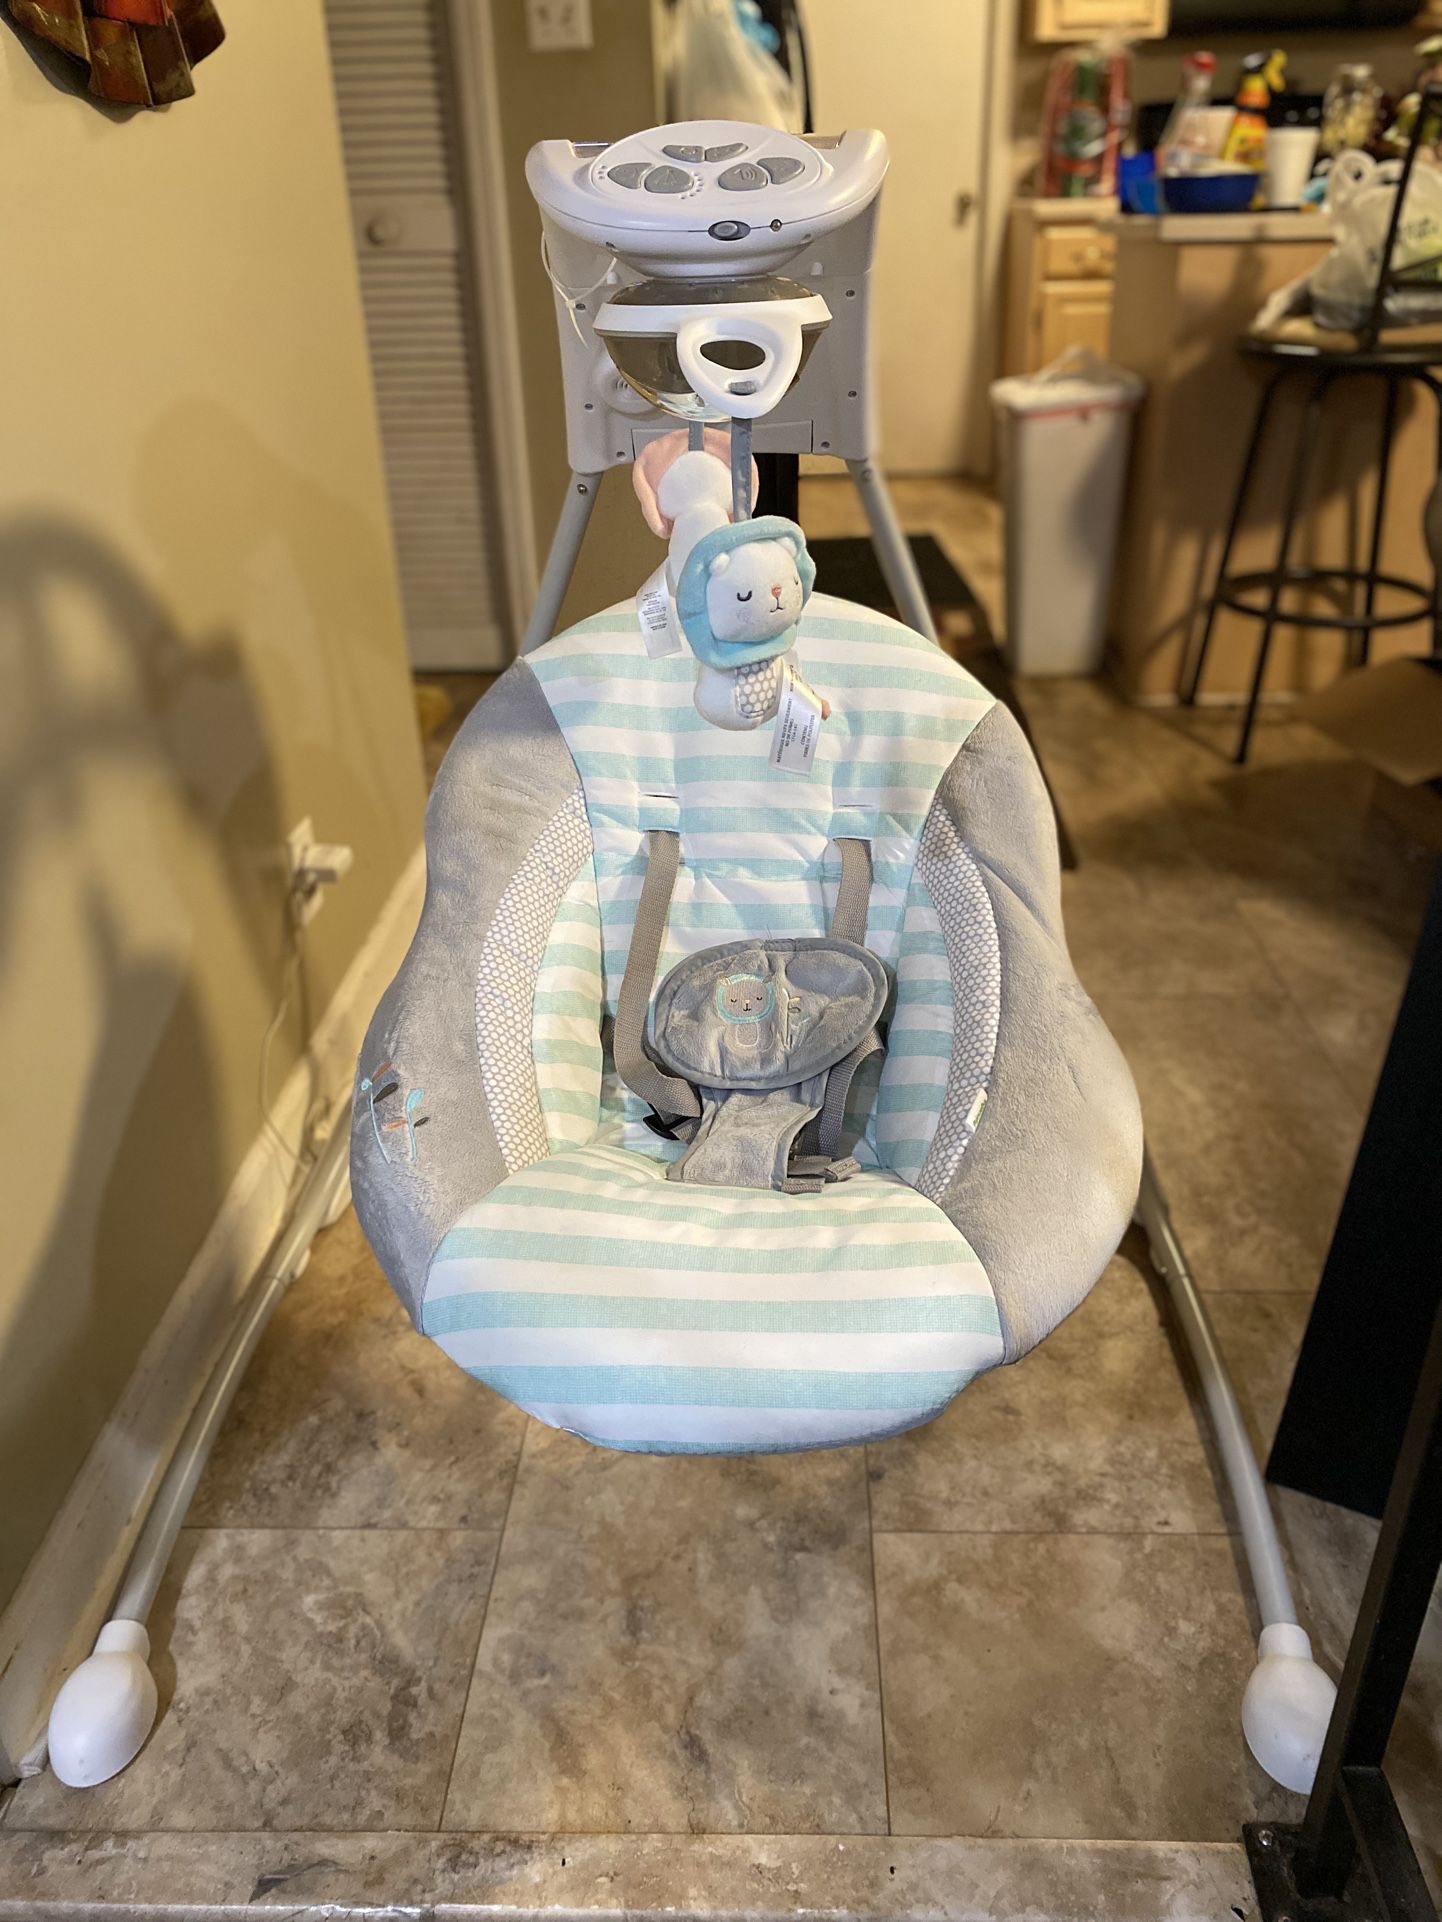 Ingenuity InLighten 6-Speed Foldable Baby Swing 0-9 Months 6-20 lbs (Blue Landry the Lion) Cash Only